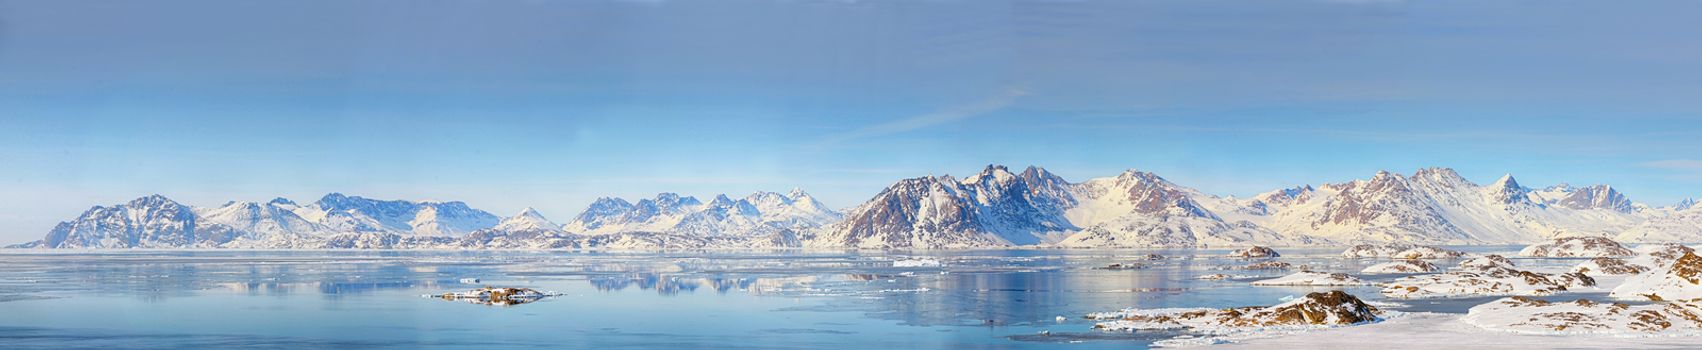 Greenland panorama shoot in spring time